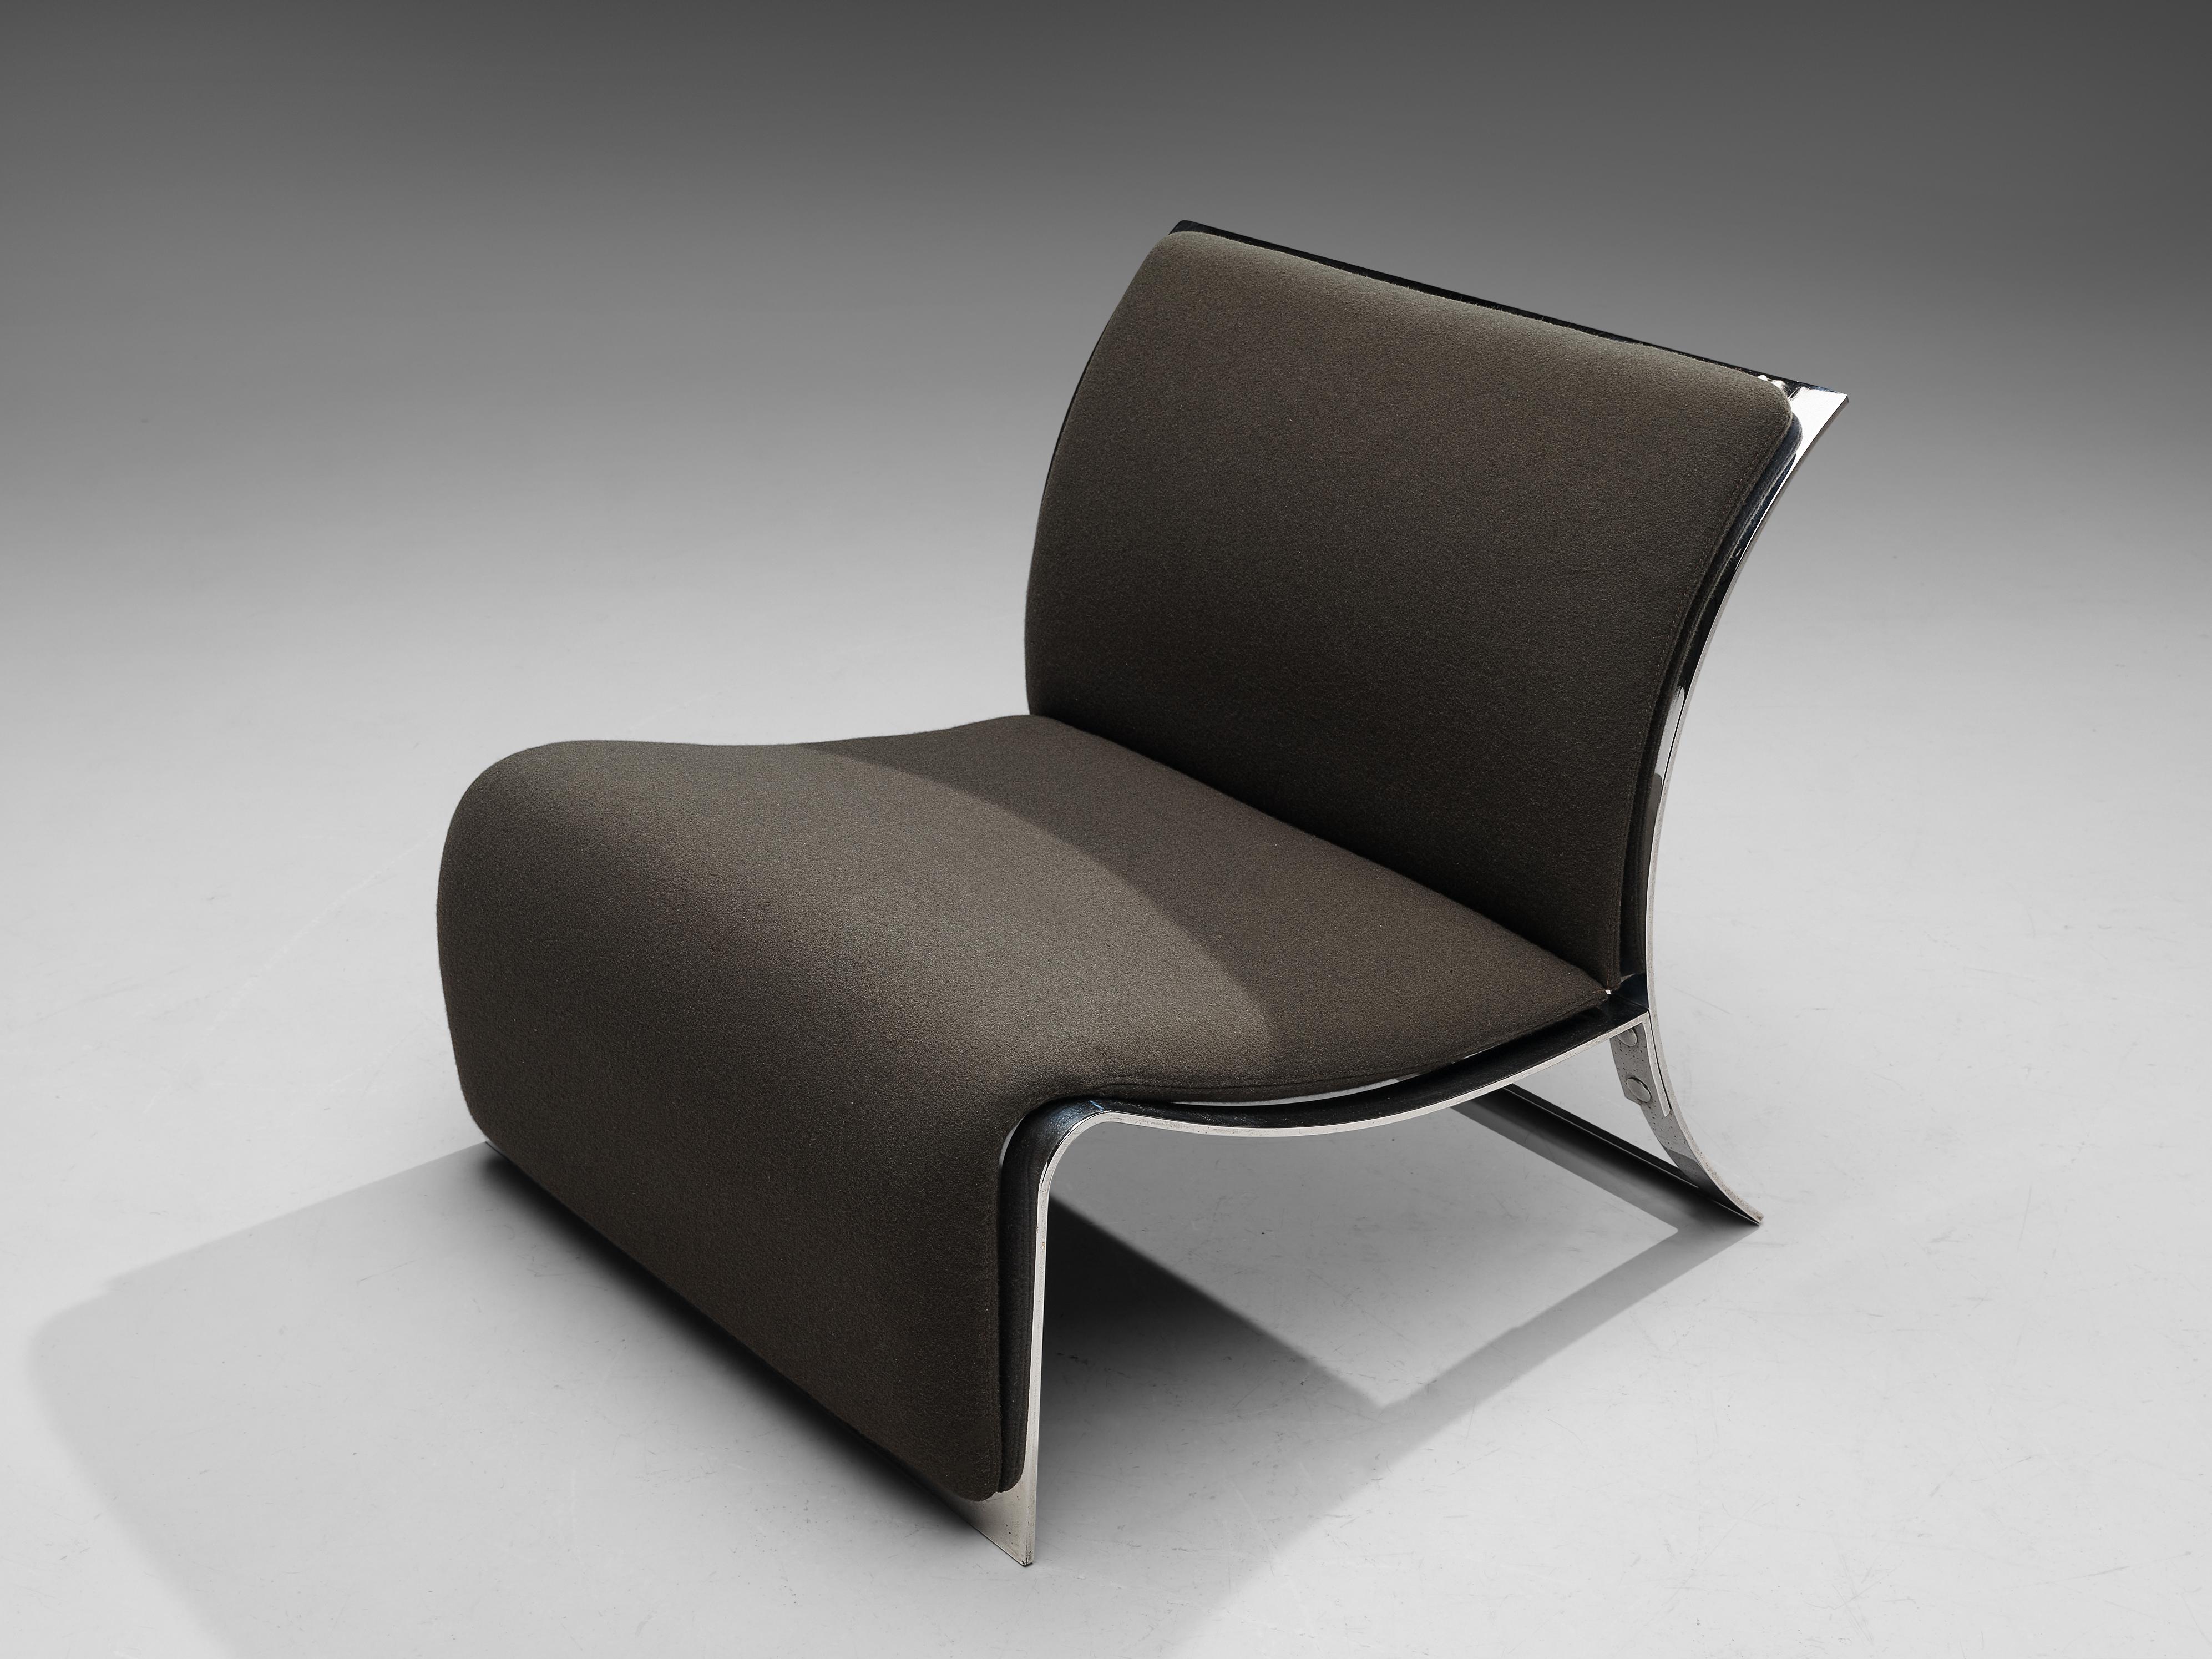 Steel Vittorio Introini for Saporiti Lounge Chair with Frame in Chrome